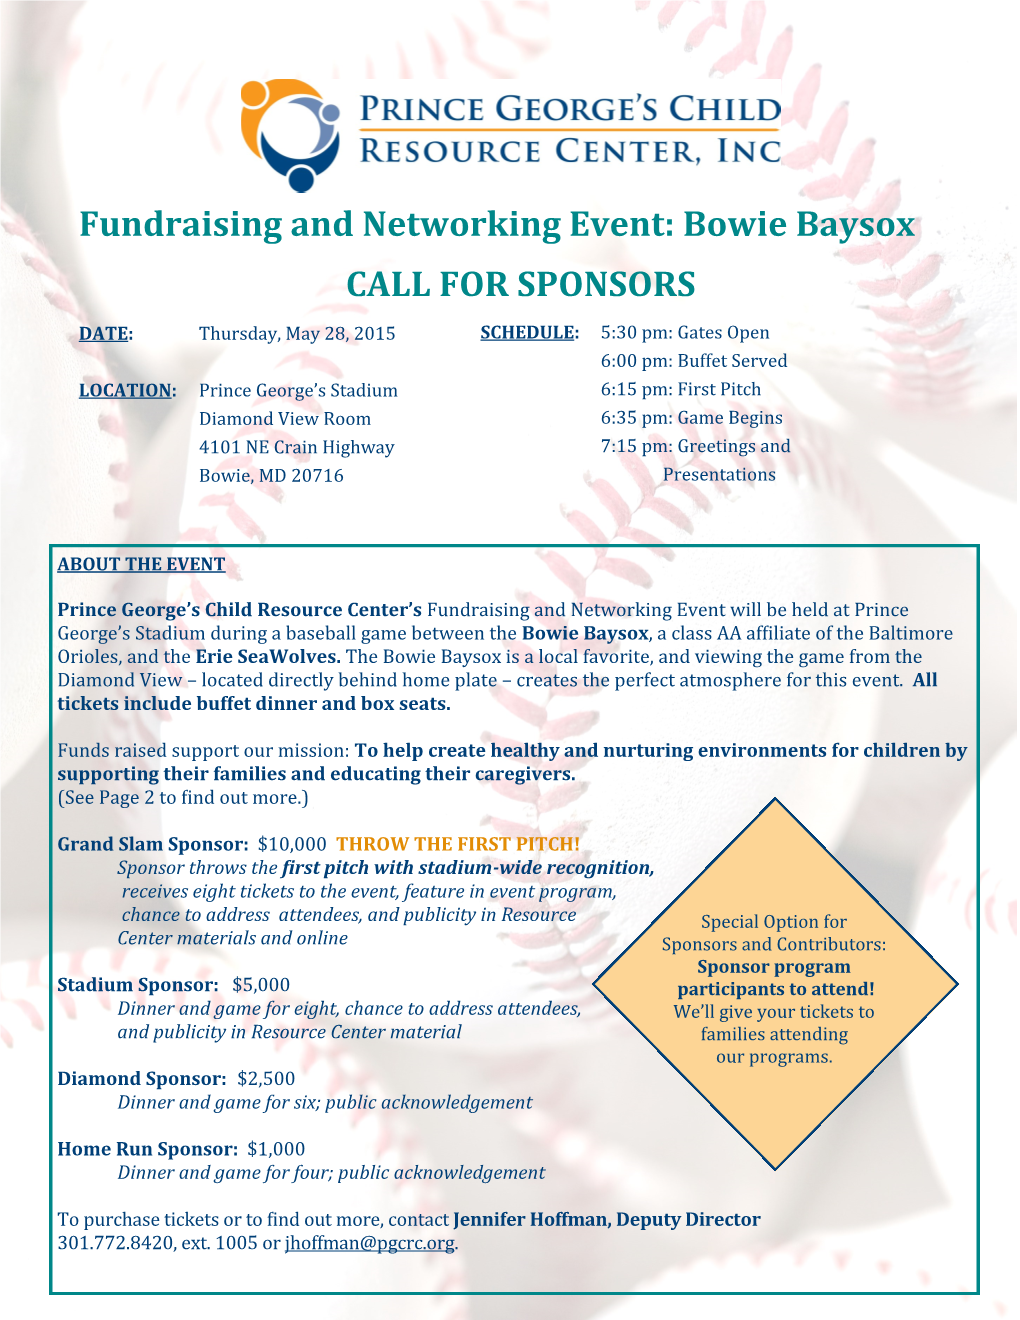 Fundraising and Networking Event: Bowie Baysox CALL for SPONSORS